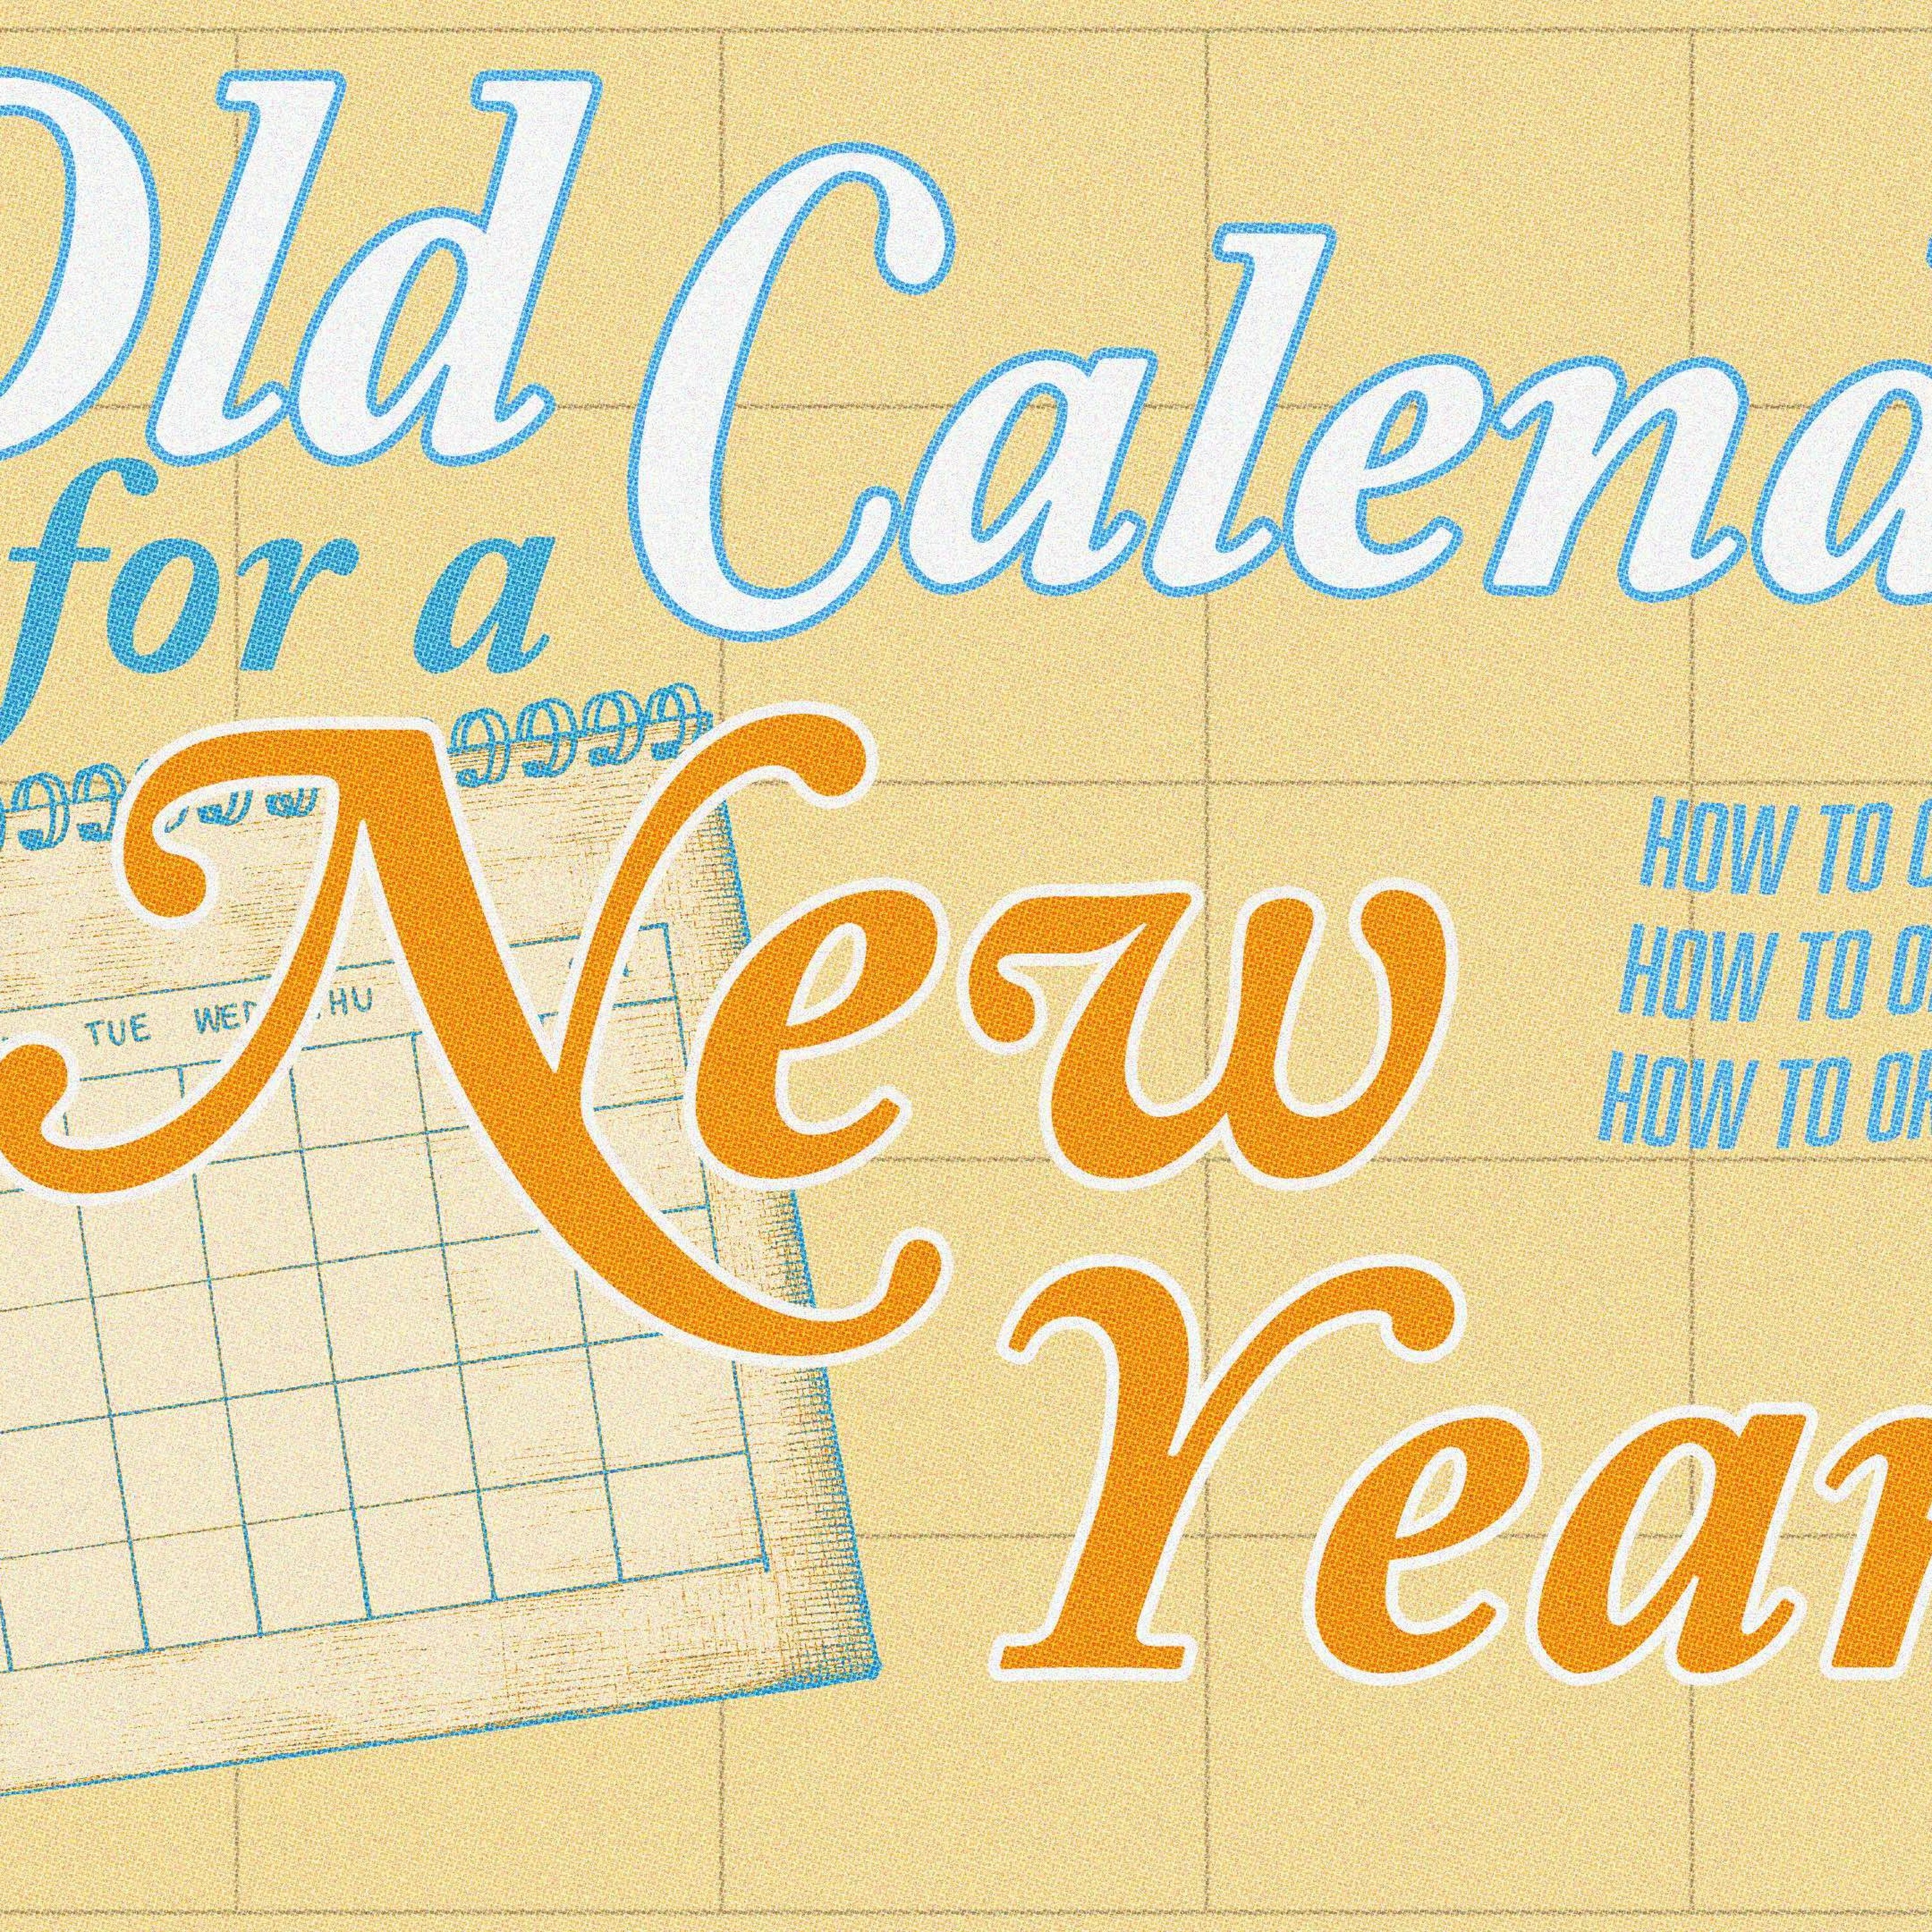 How To Organize A Year | Old Calendar For A New Year | Ethan Magness